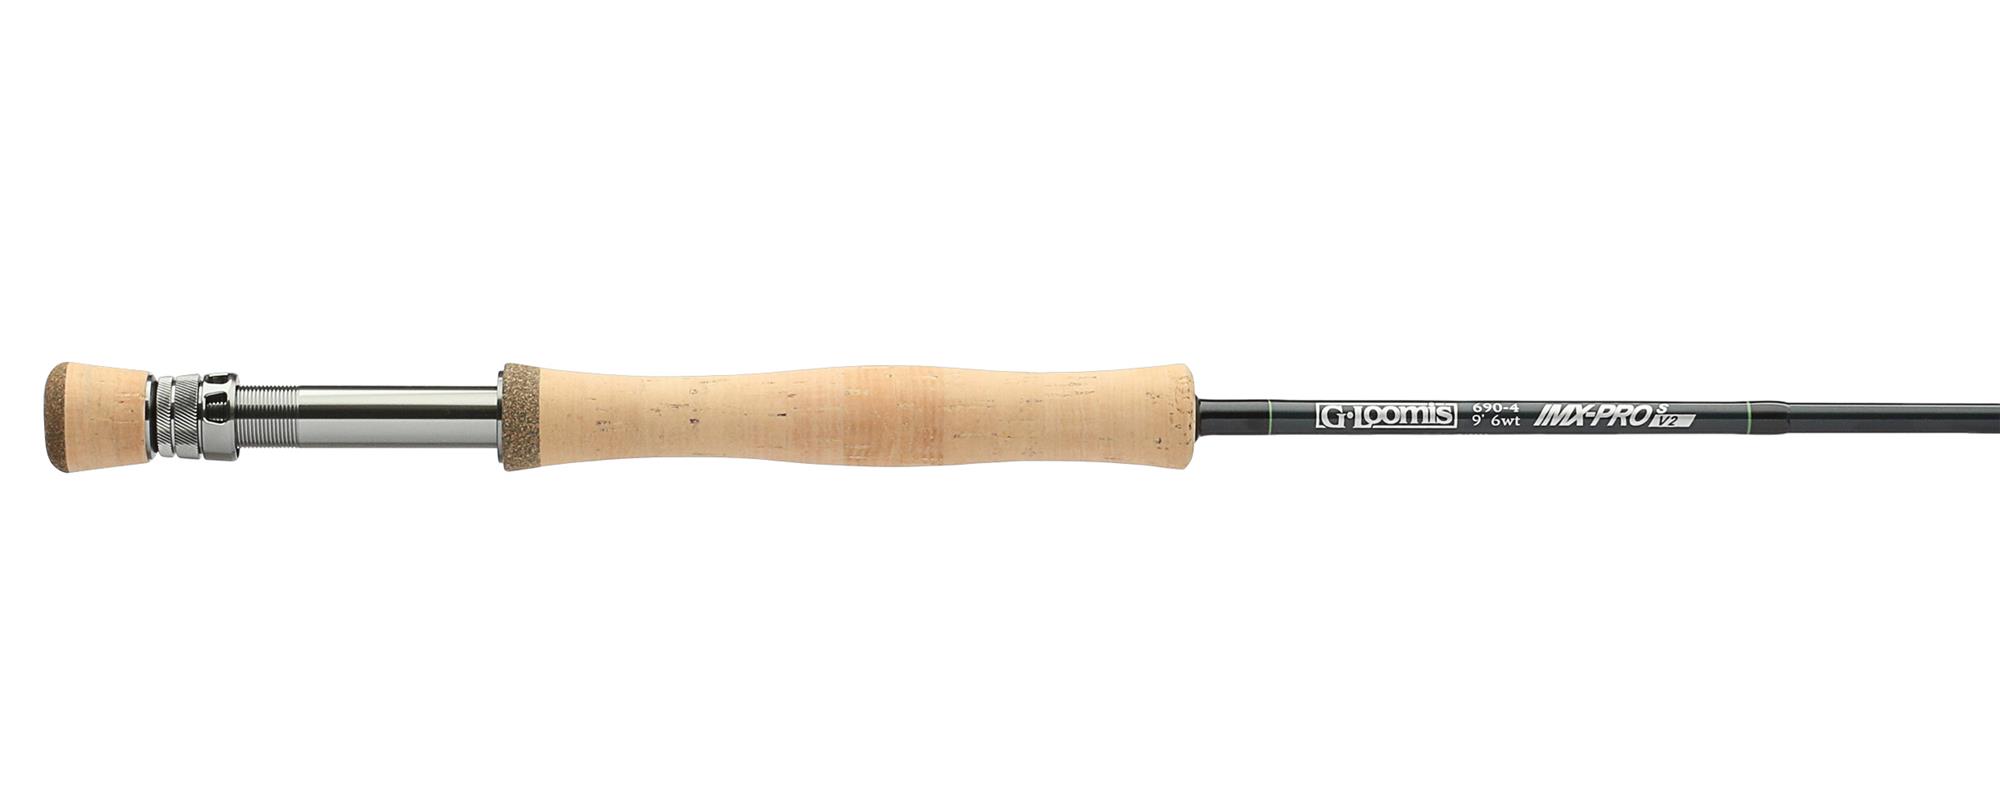 G.Loomis IMX-PRO V2S Fly Rod, Buy Loomis Fly Rods Online, GLoomis Fly  Fishing Rods For Sale, IMX V2S Fly Rods